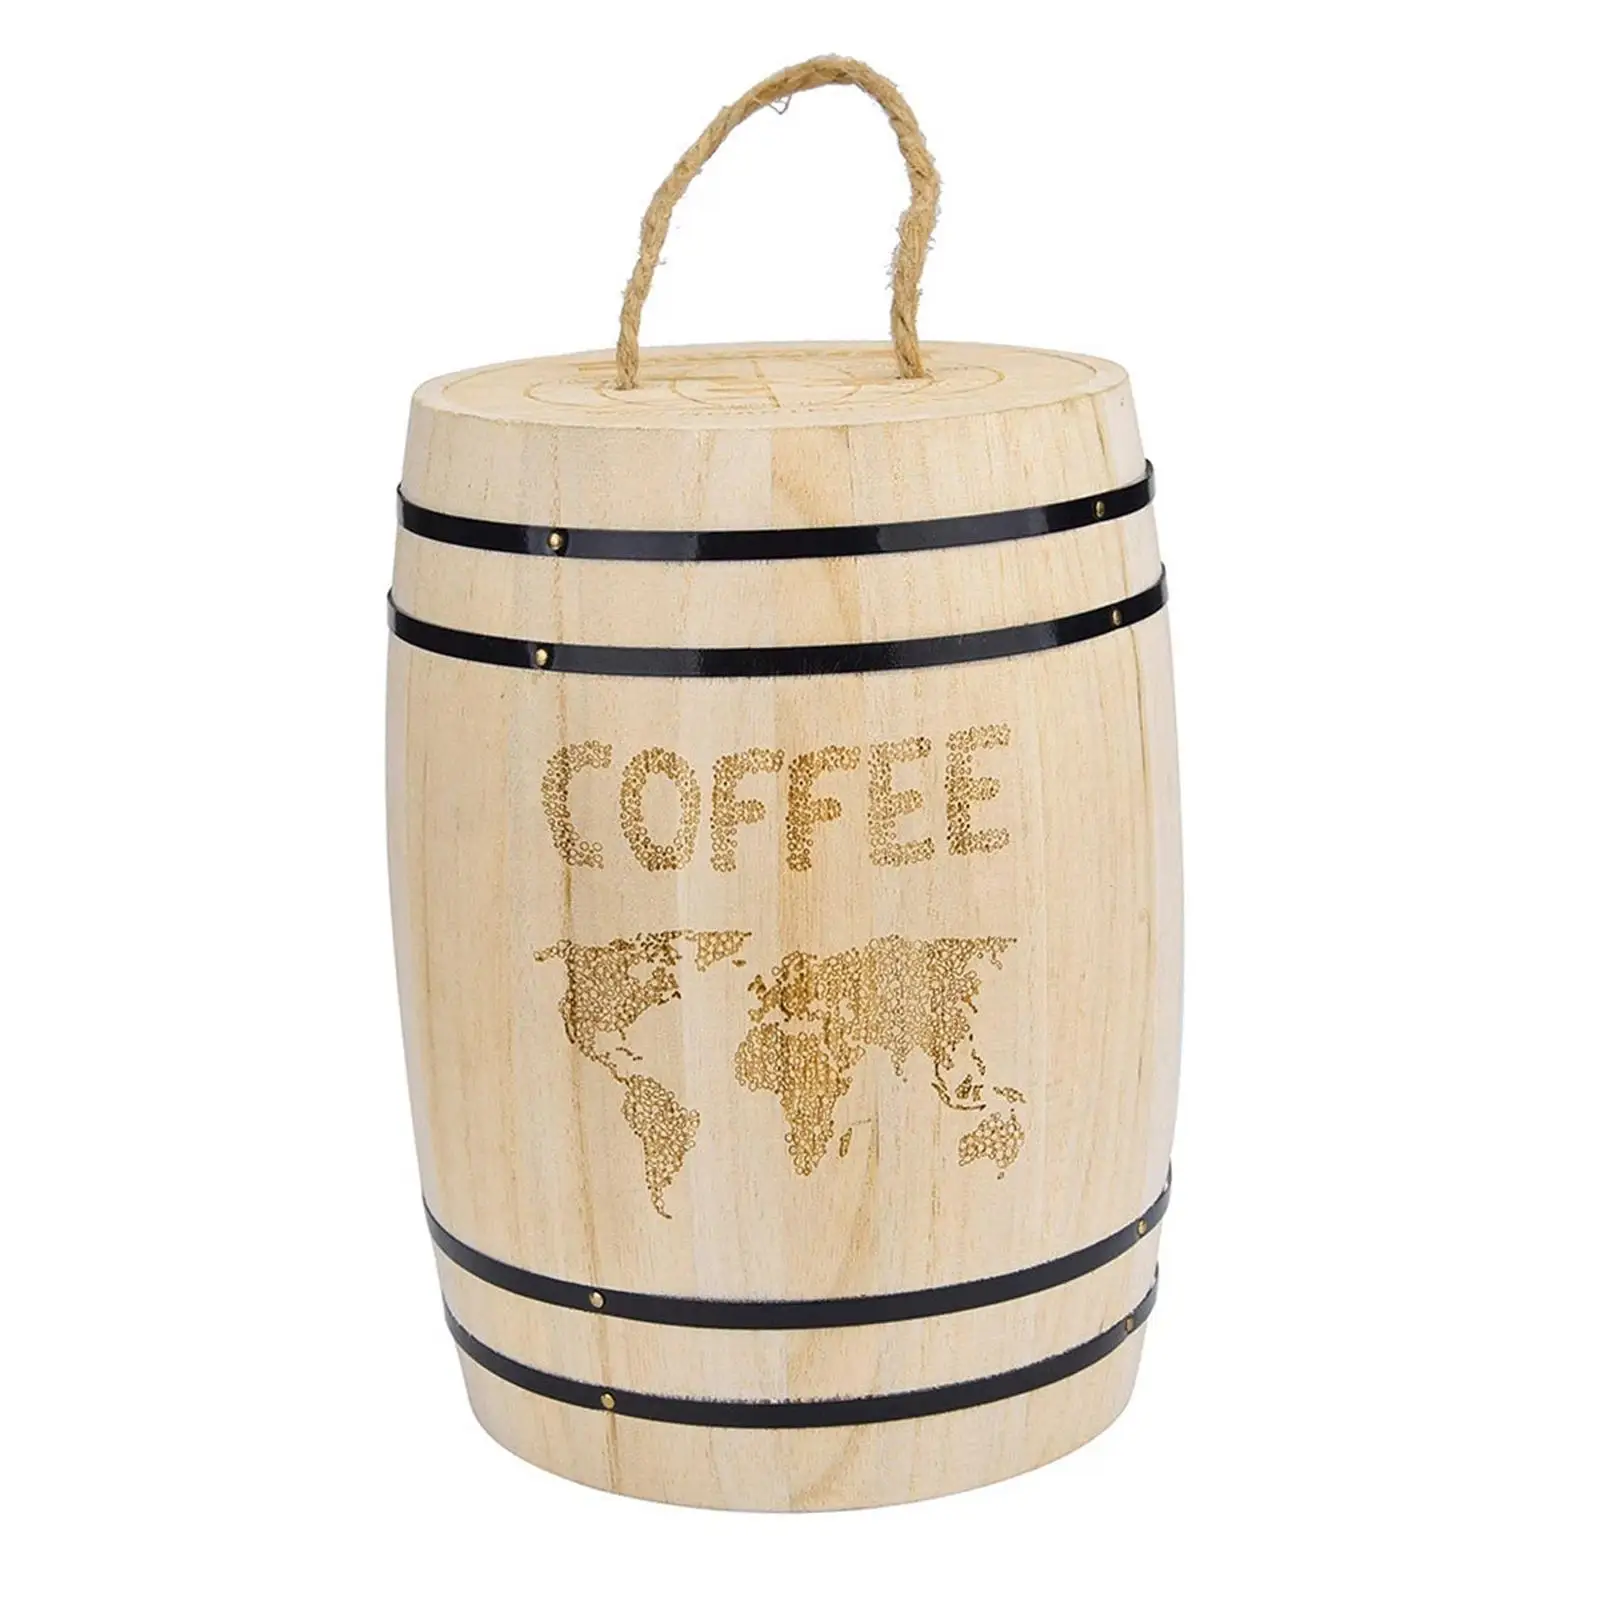 Wooden Cask Pen Holder coffee Canister Dry Food Container Desktop Ornament Durable Chic Stationery Organizer for Office